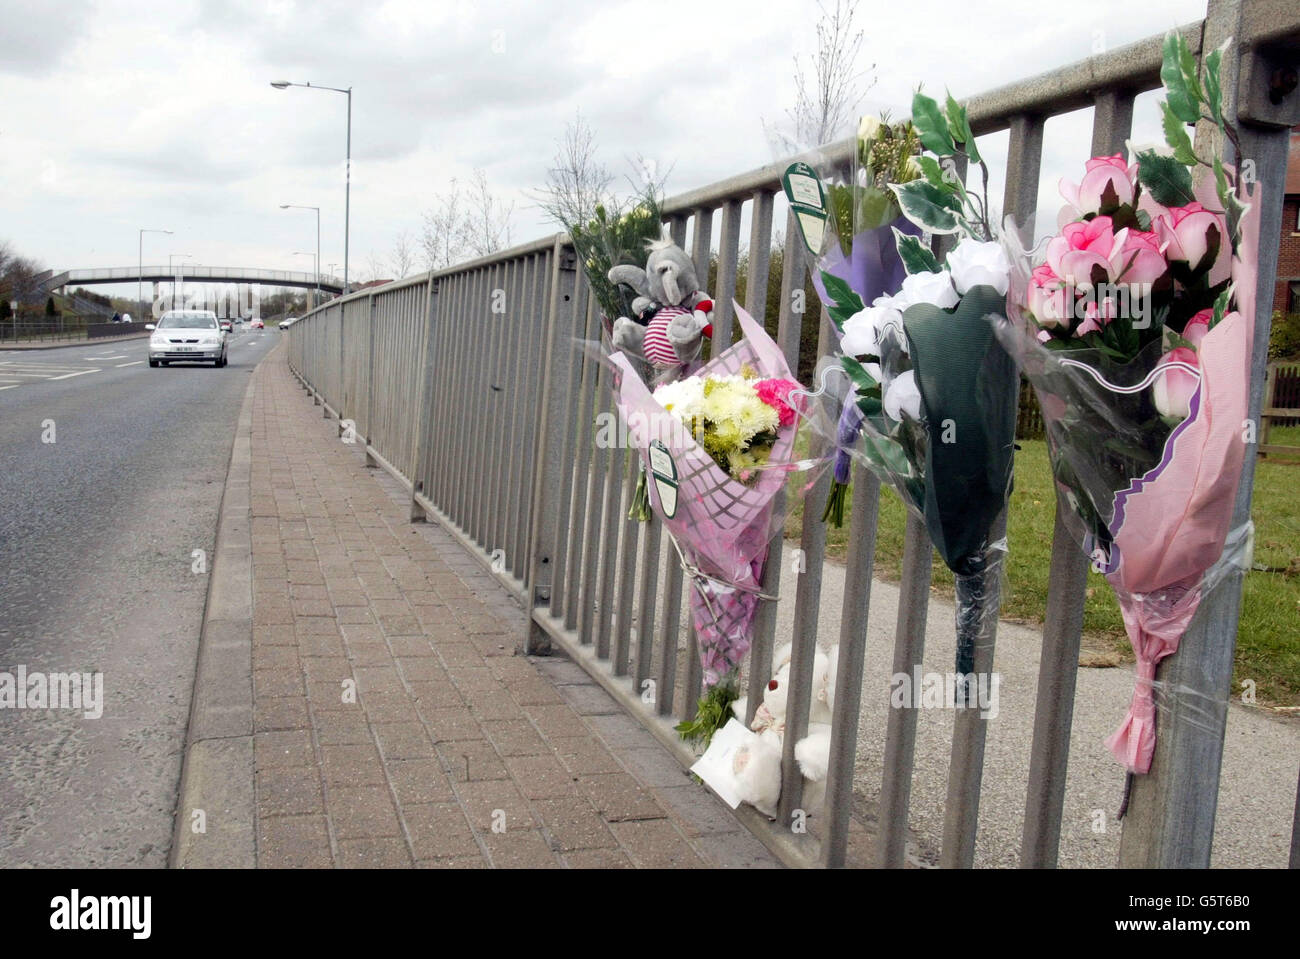 Scene of hit and run which has left six-year-old, Leonie Shaw fighting for her life after being hit by a high-powered car whilst crossing the A688, around 8pm in her home town of Bishop Auckland, County Durham. * The critically injured youngster was rushed to the town's general hospital with head, leg and internal injuries. Stock Photo